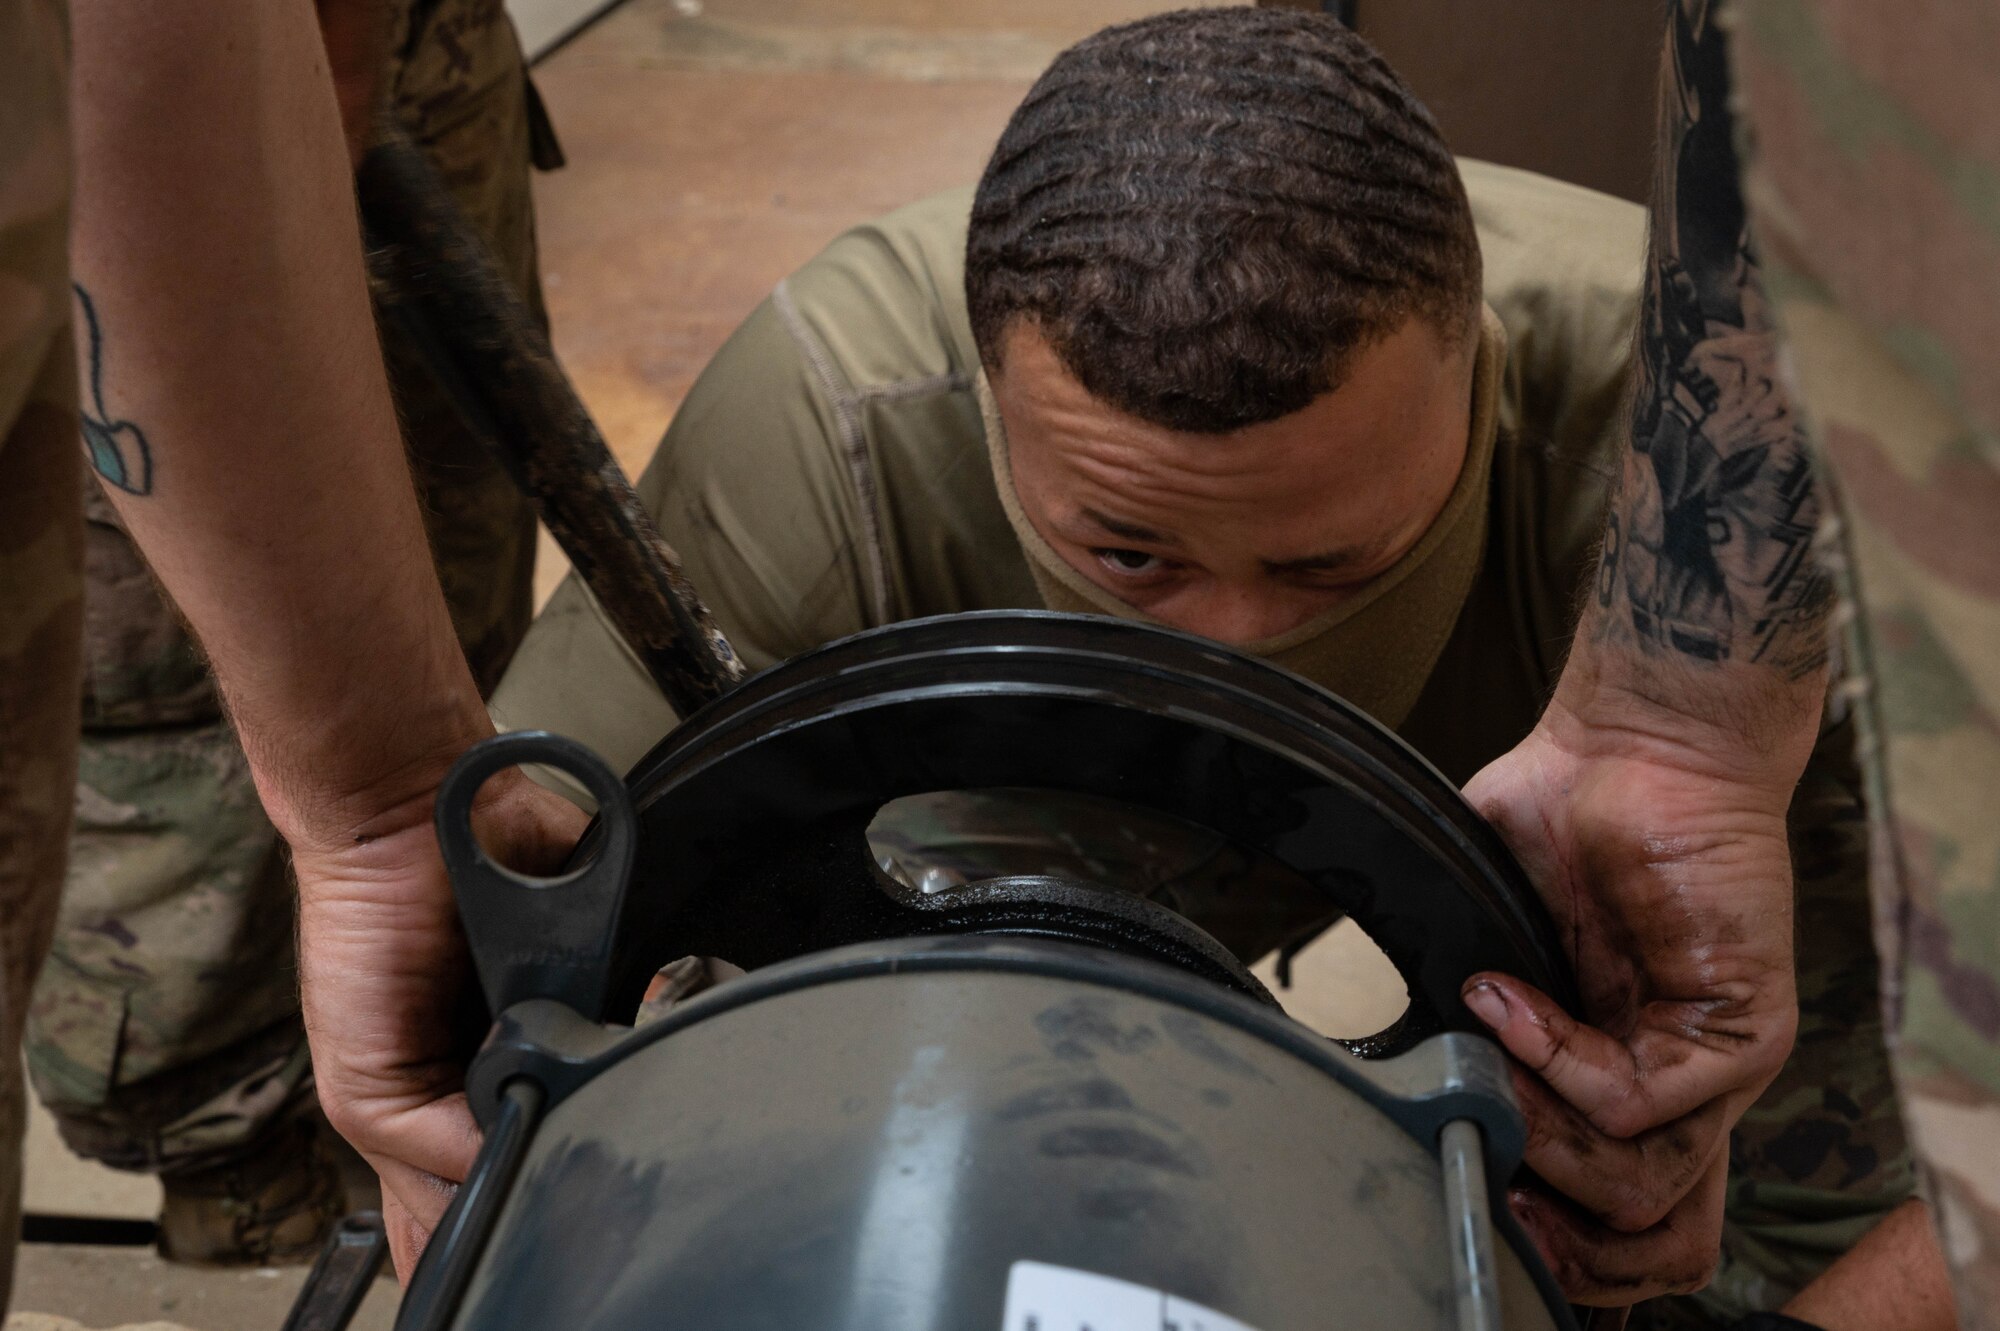 Senior Airman James Stone, 51st Civil Engineering Squadron heating ventilation and air conditioning (HVAC) technician, checks the alignment of a pulley